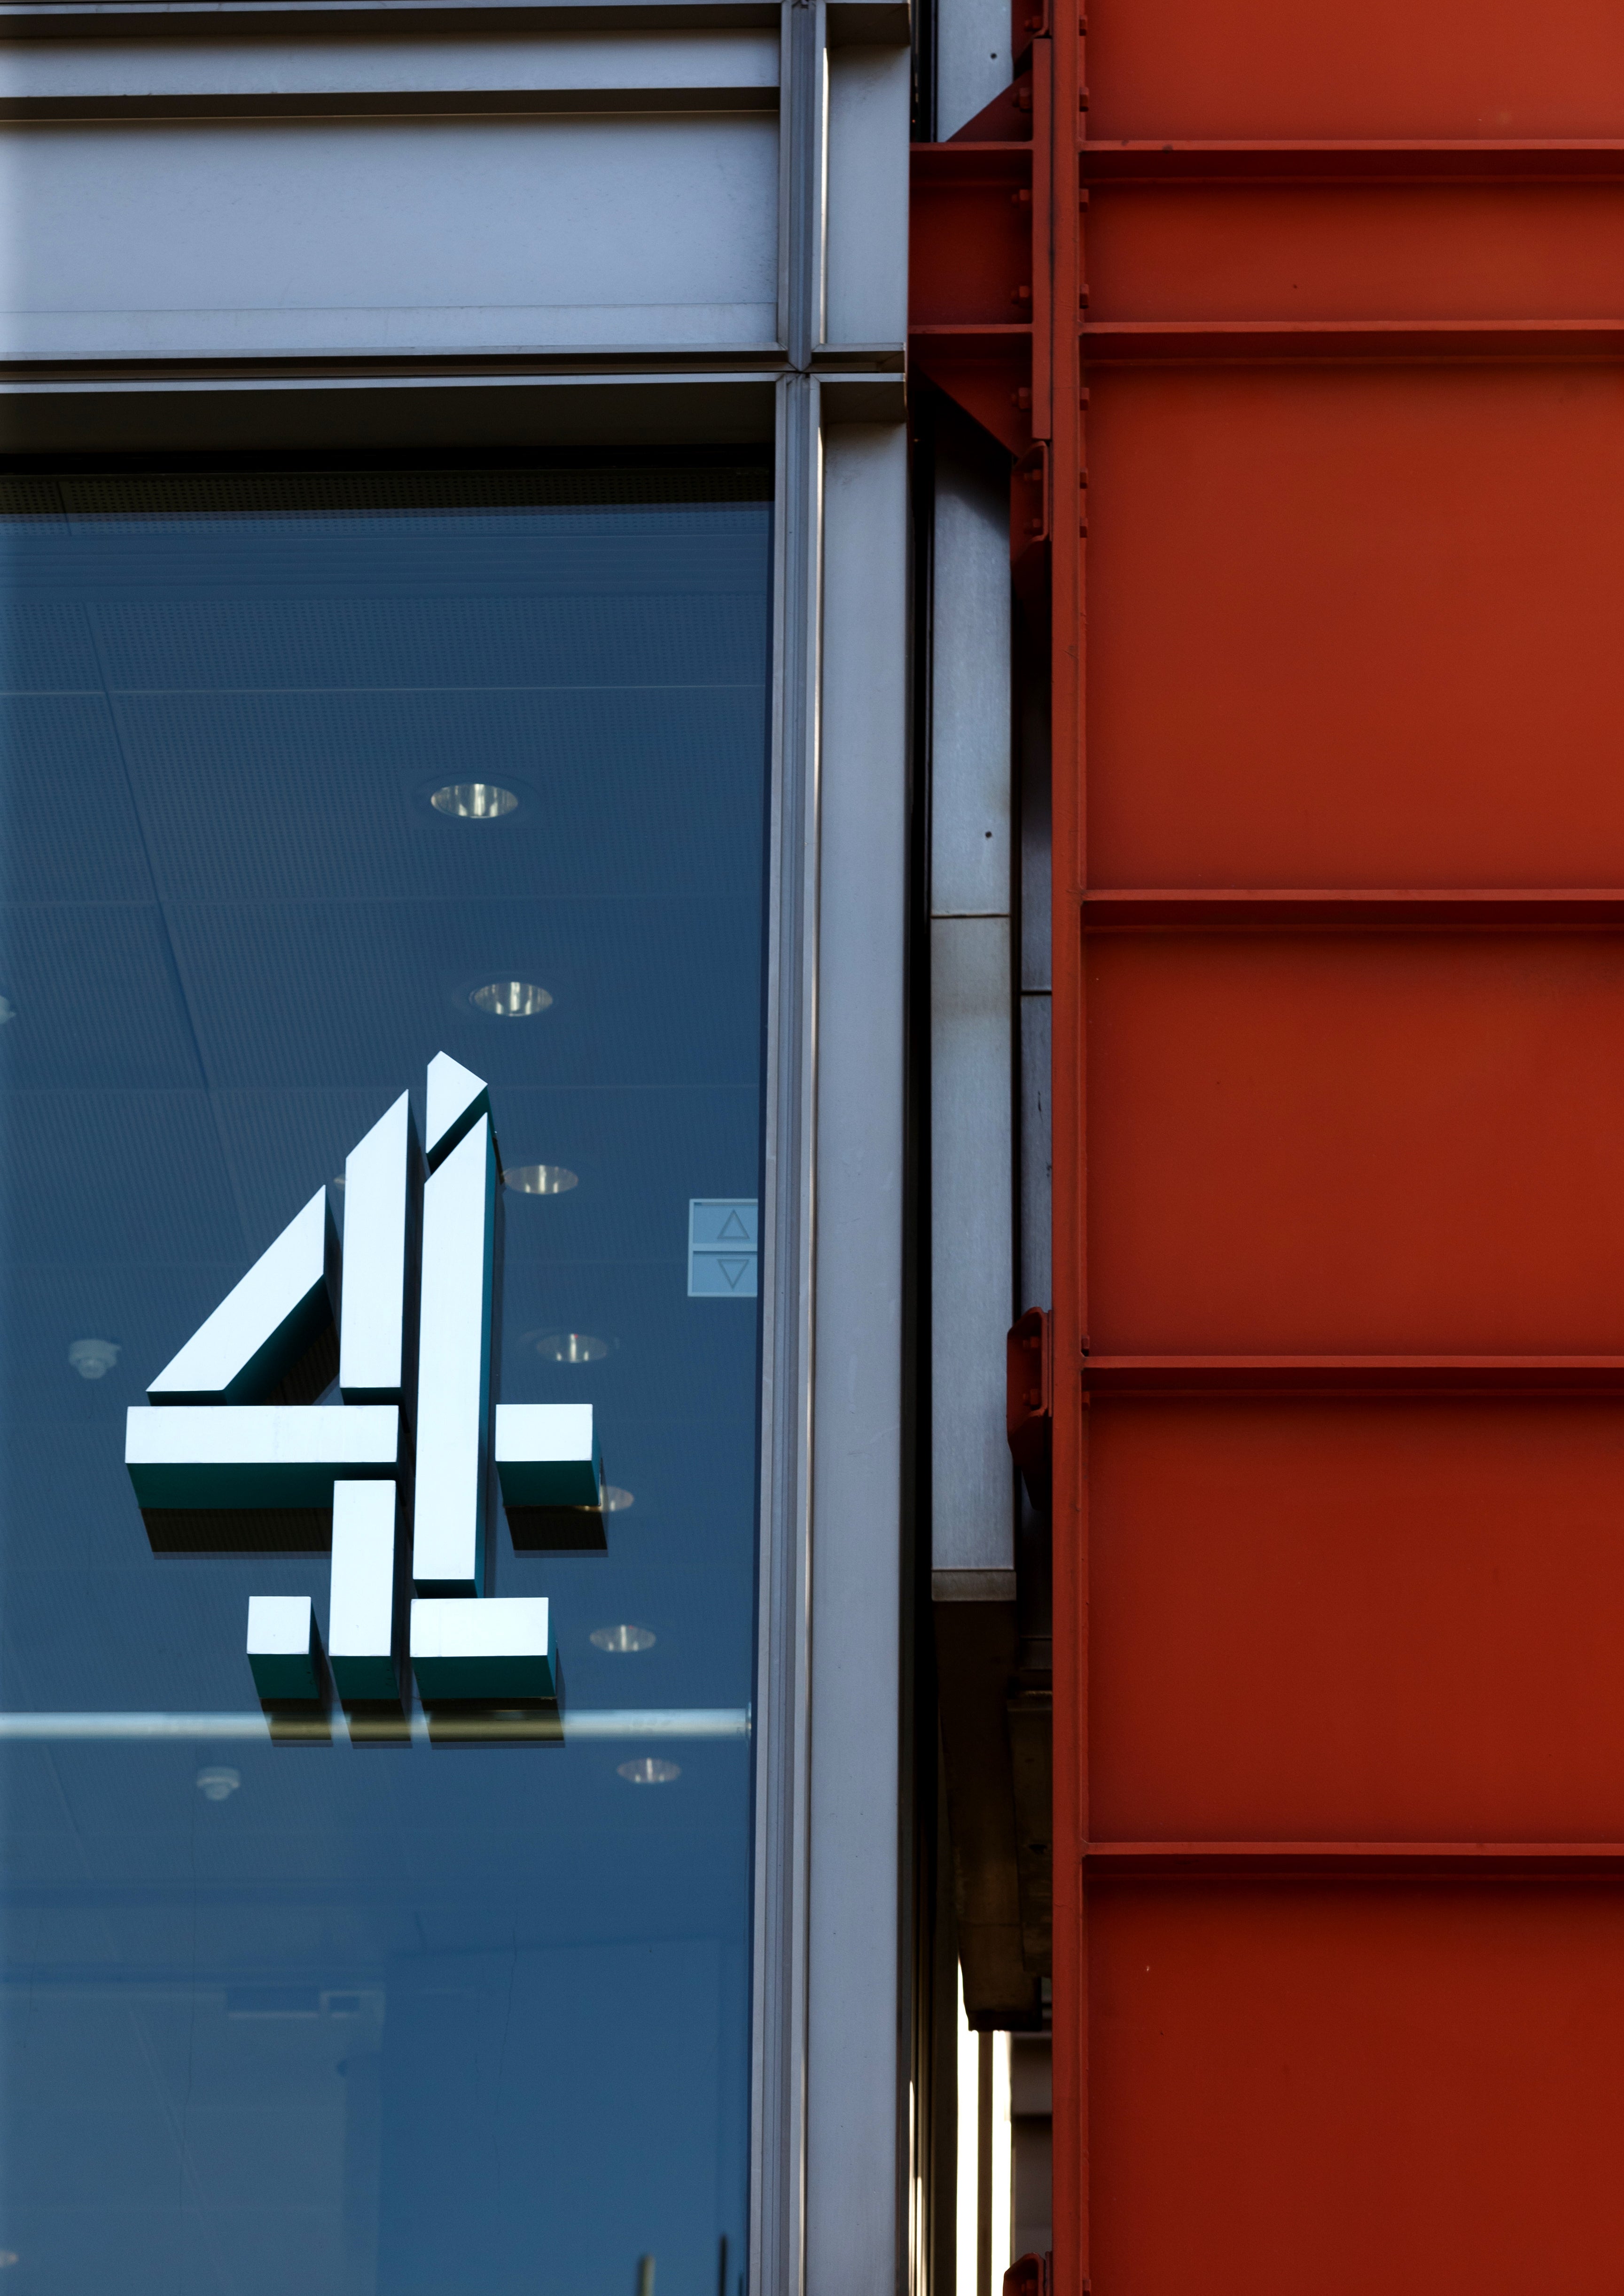 Channel 4 was founded in 1982 to deliver to under-served audiences (John Walton/PA)